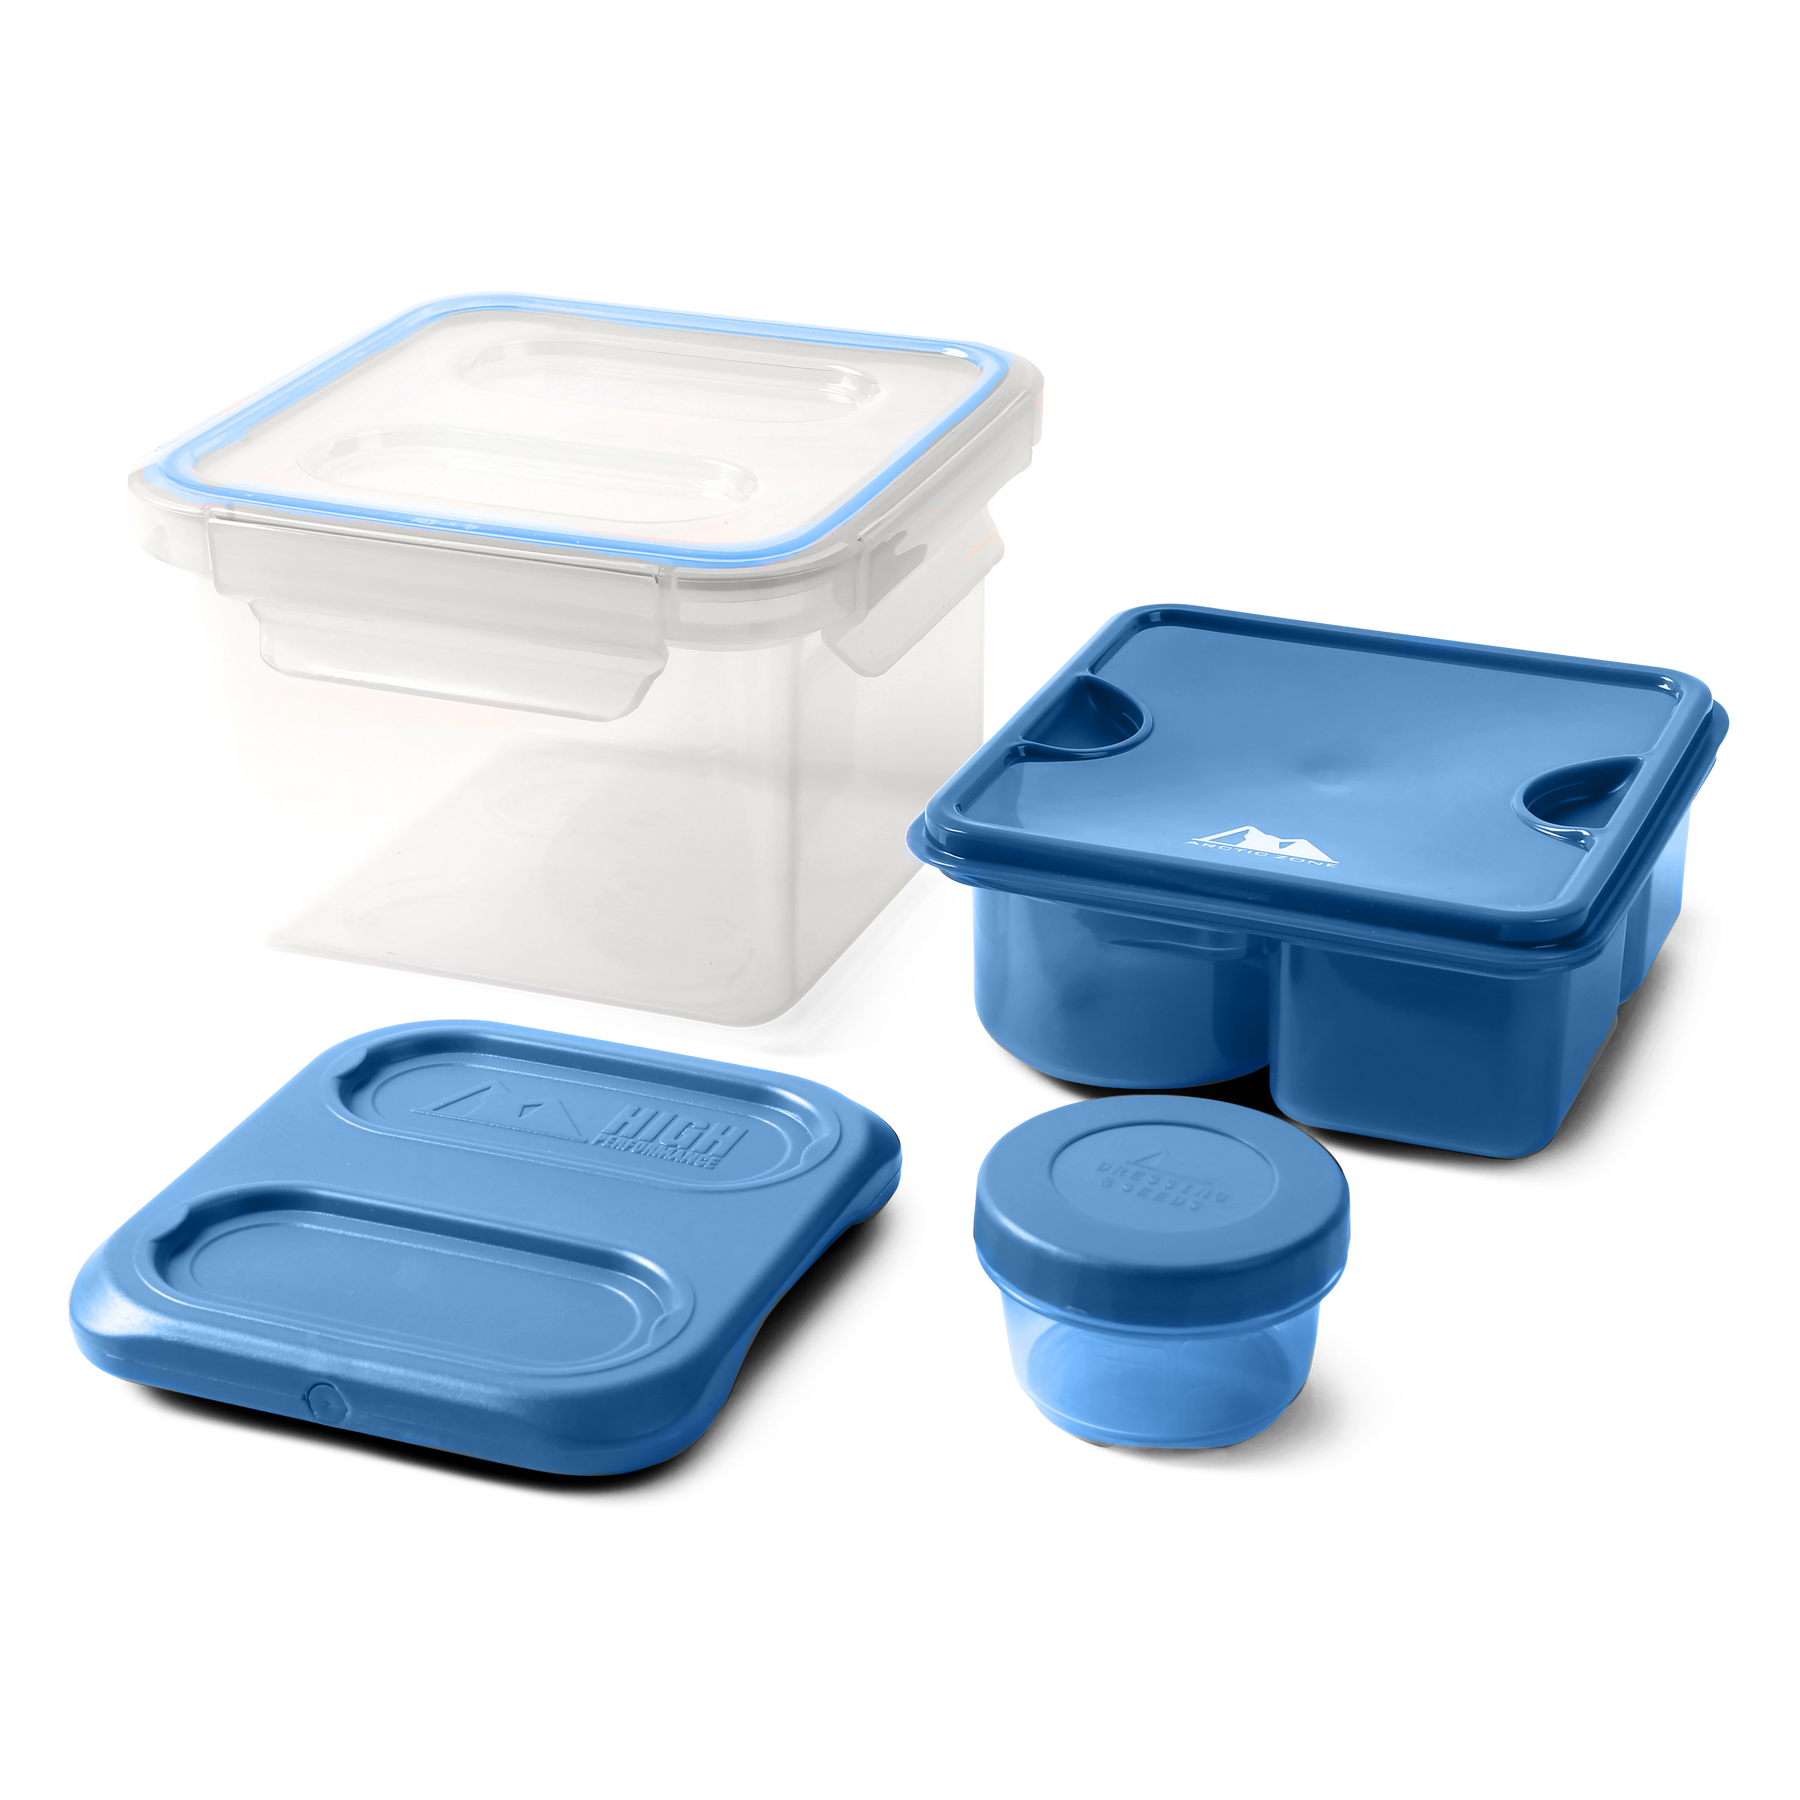 8 Piece All-in-One Entrée Set Navy by Arctic Zone